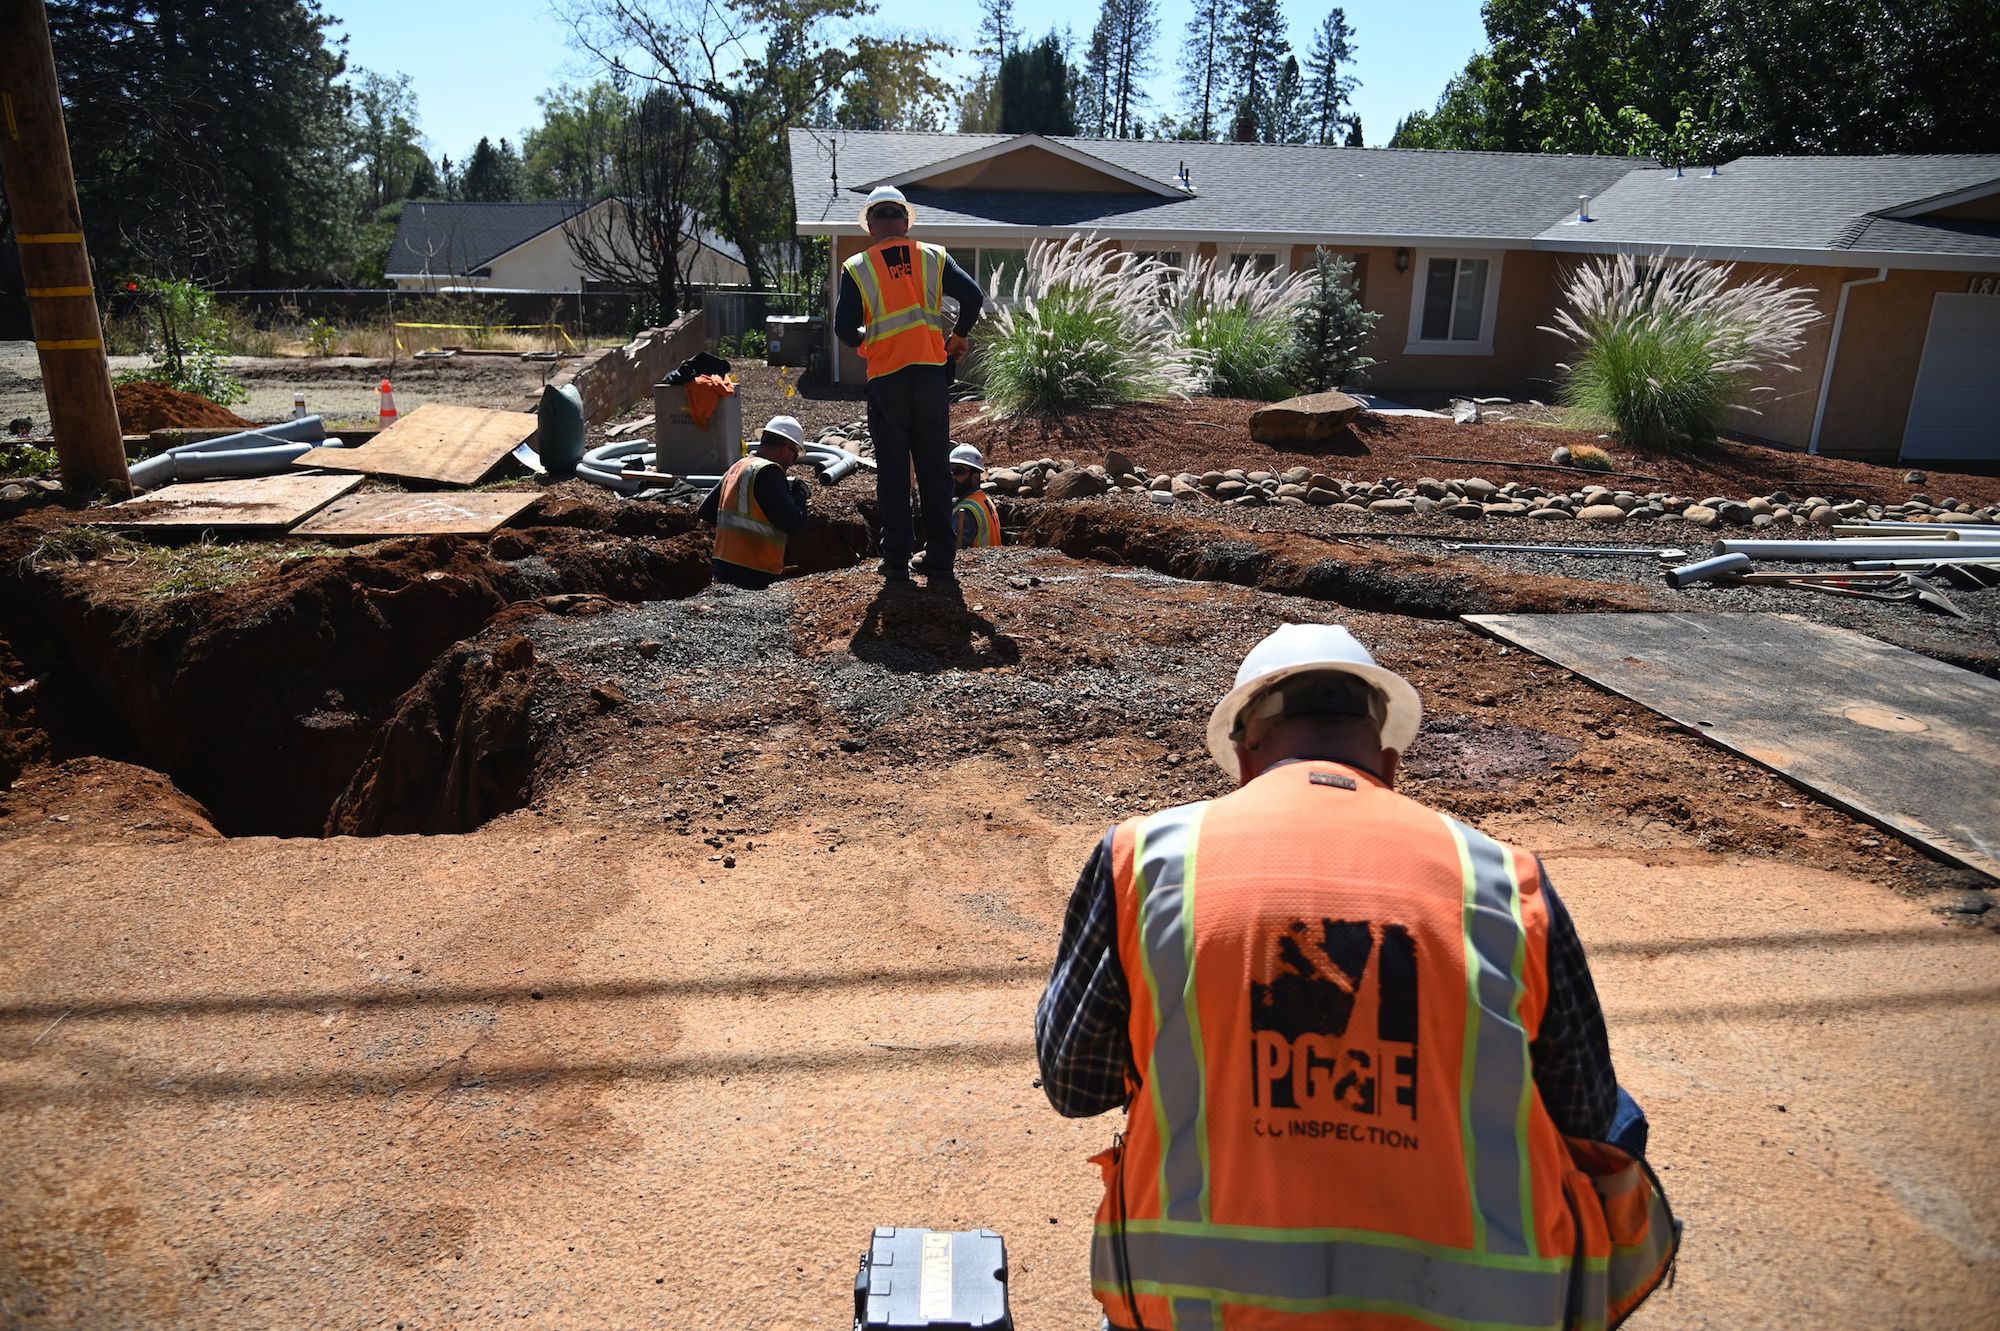 a person in an orange construction vest with PG&E on the back sits in front of a dirt path. In front of them, another worker is standing by a big hole in the dirt ground.